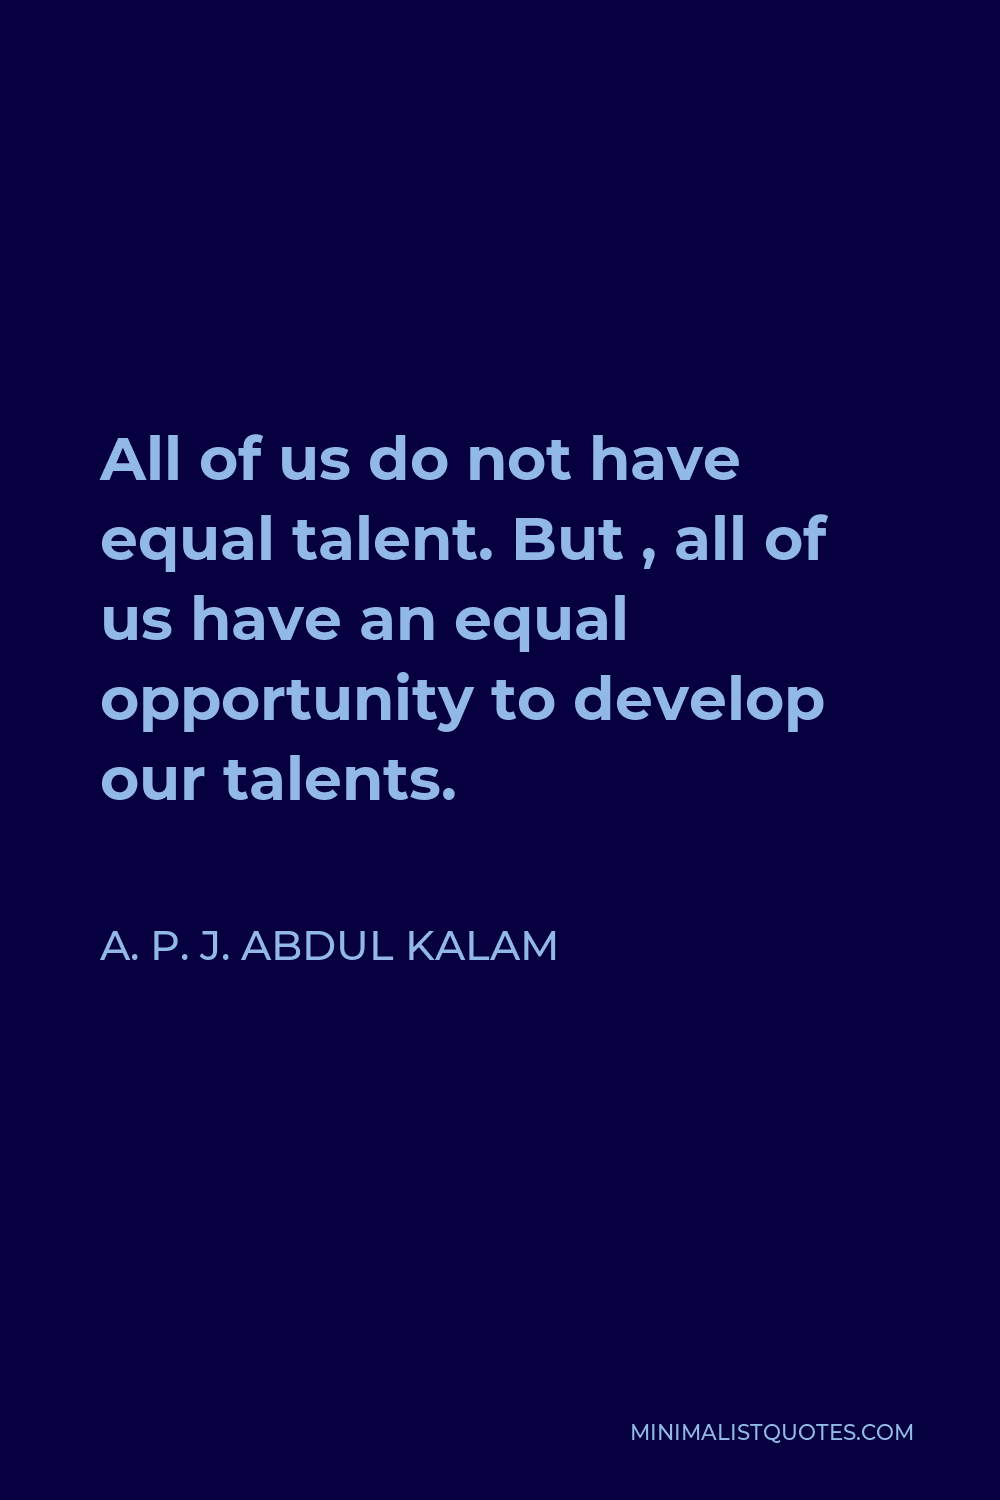 A. P. J. Abdul Kalam Quote - All of us do not have equal talent. But , all of us have an equal opportunity to develop our talents.